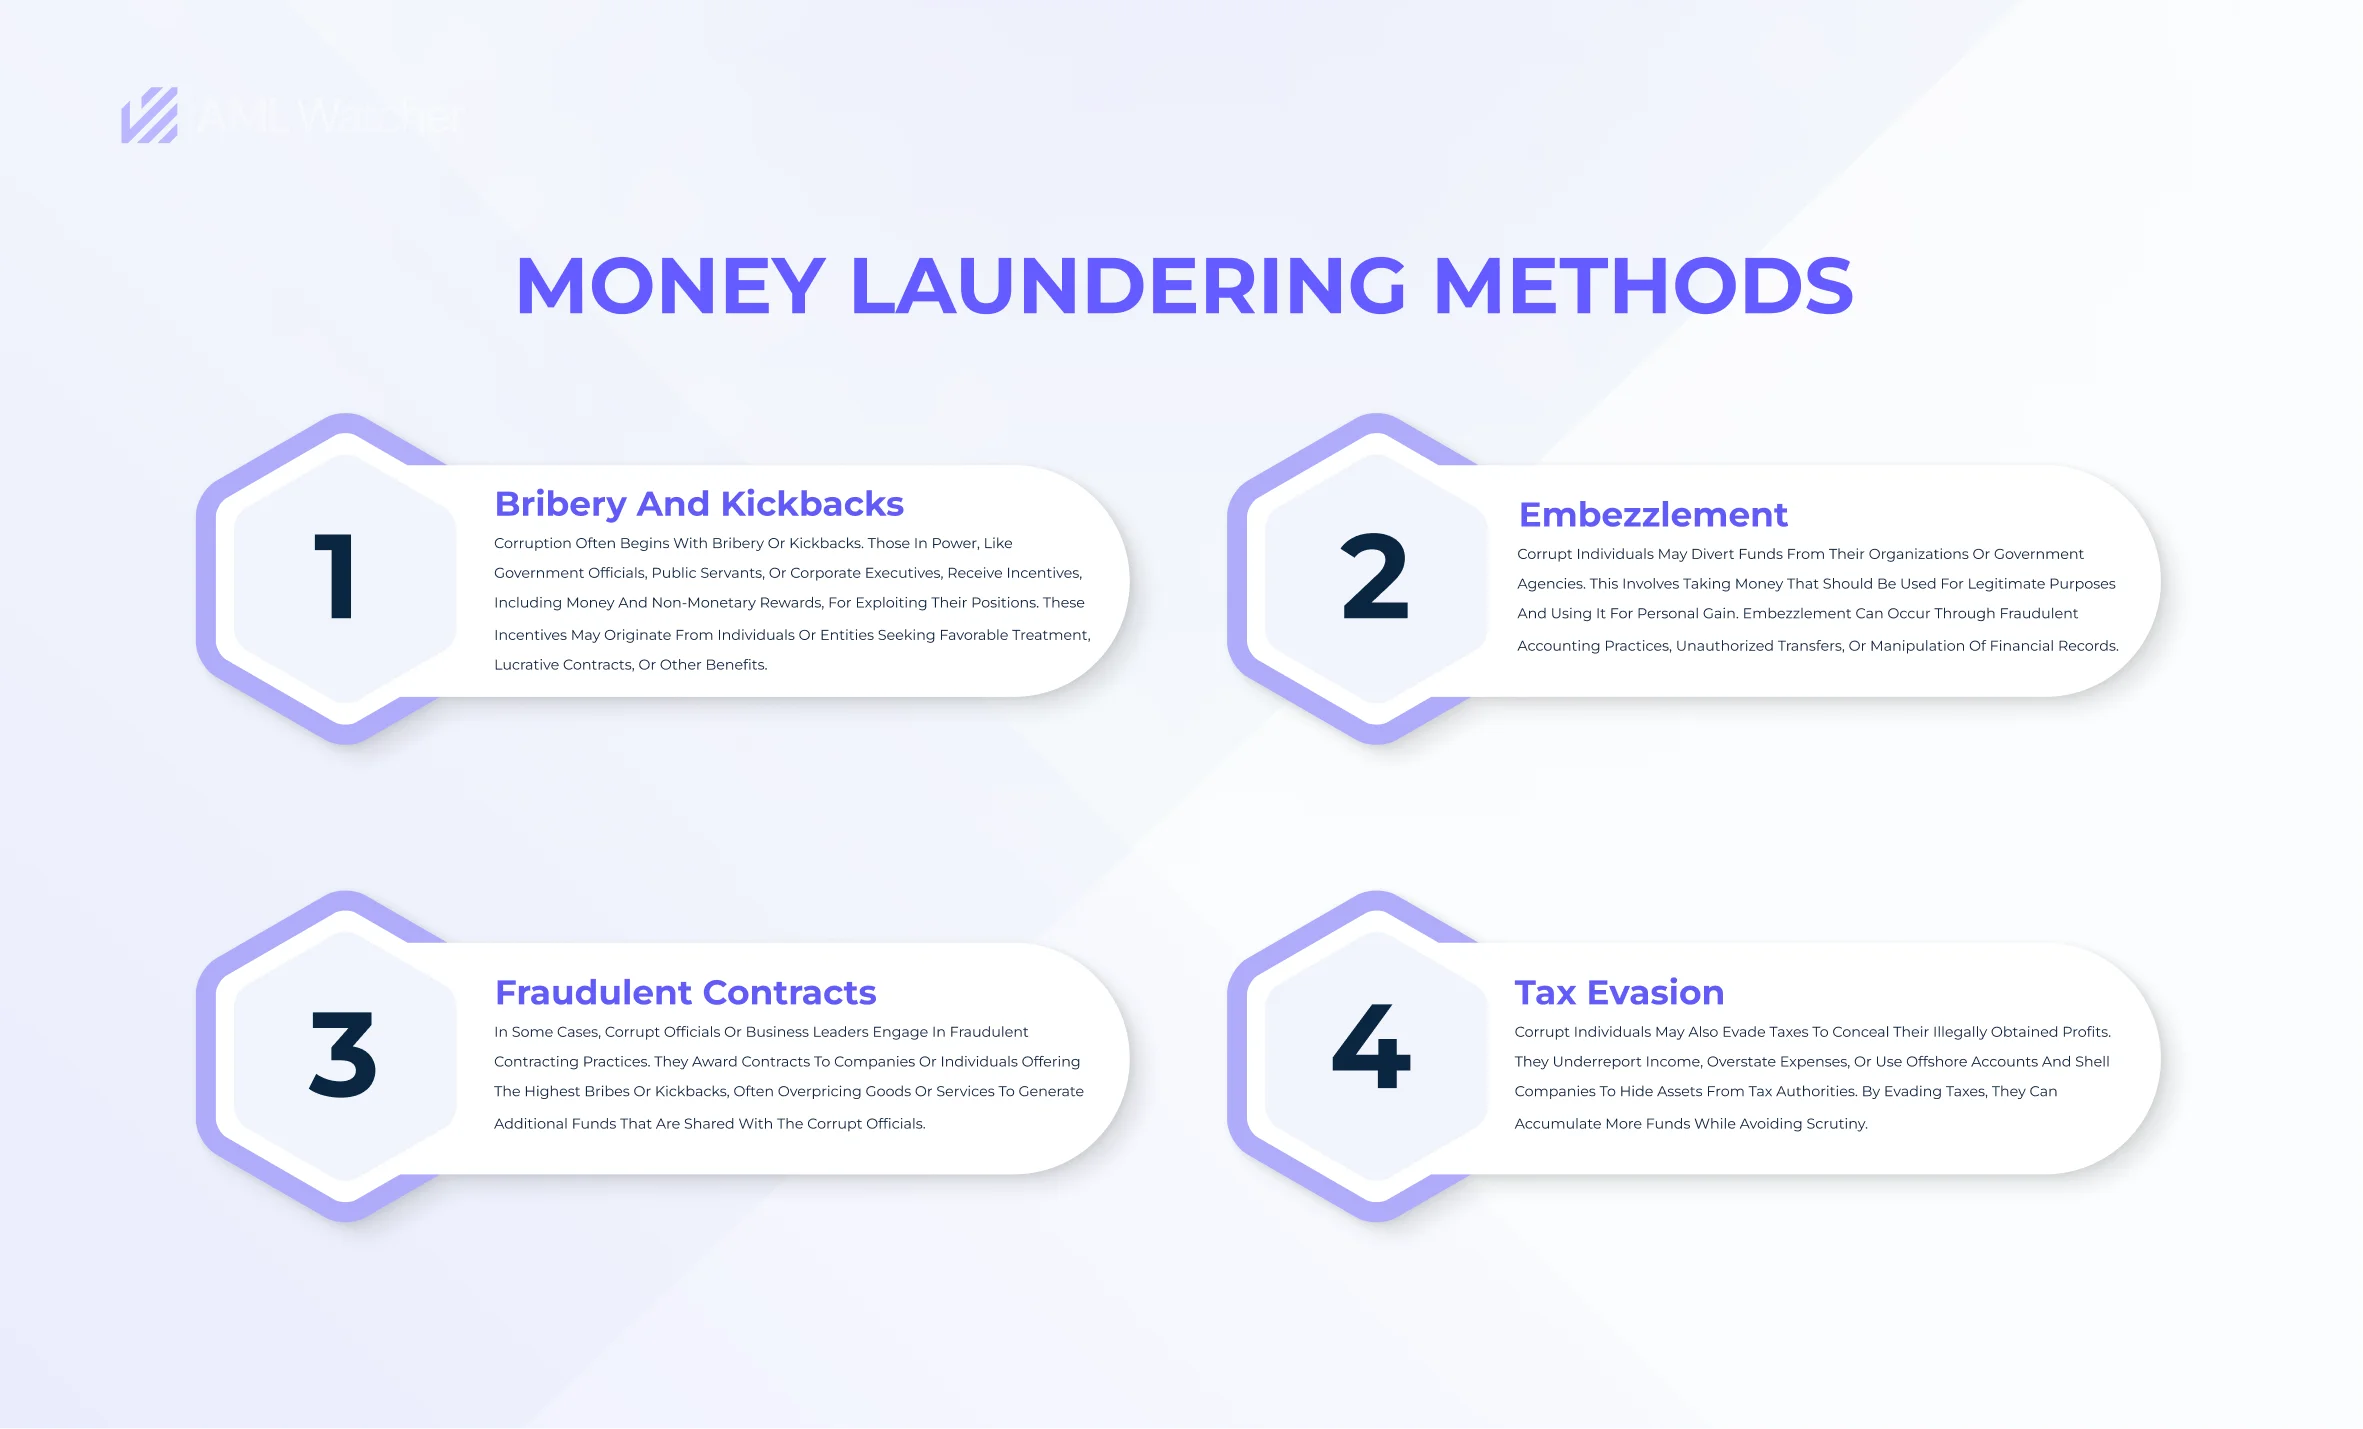 This infographic involves the methods used in money laundering and corruption.